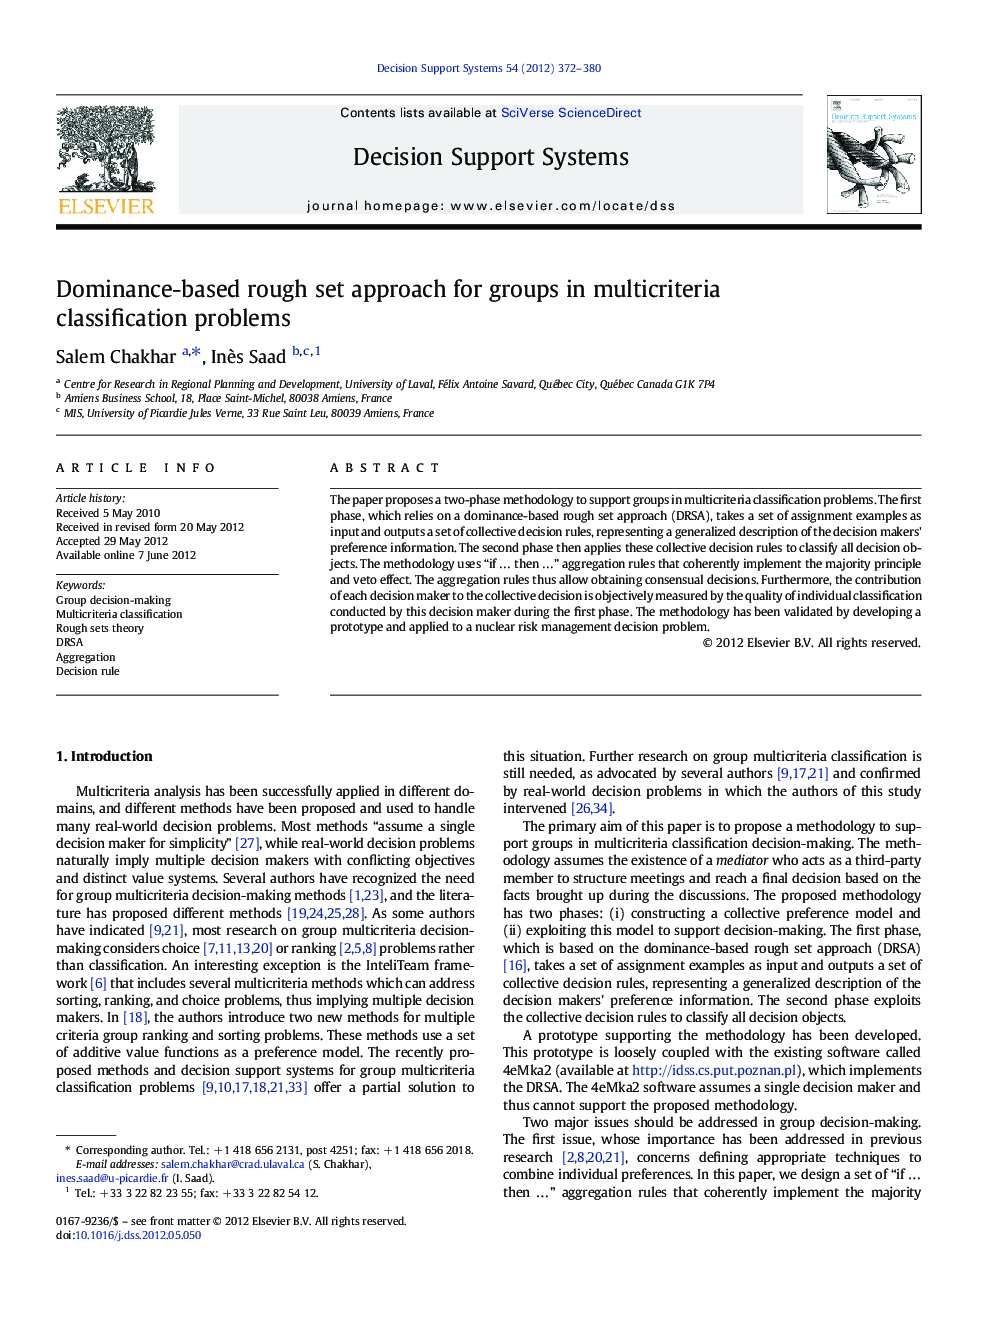 Dominance-based rough set approach for groups in multicriteria classification problems